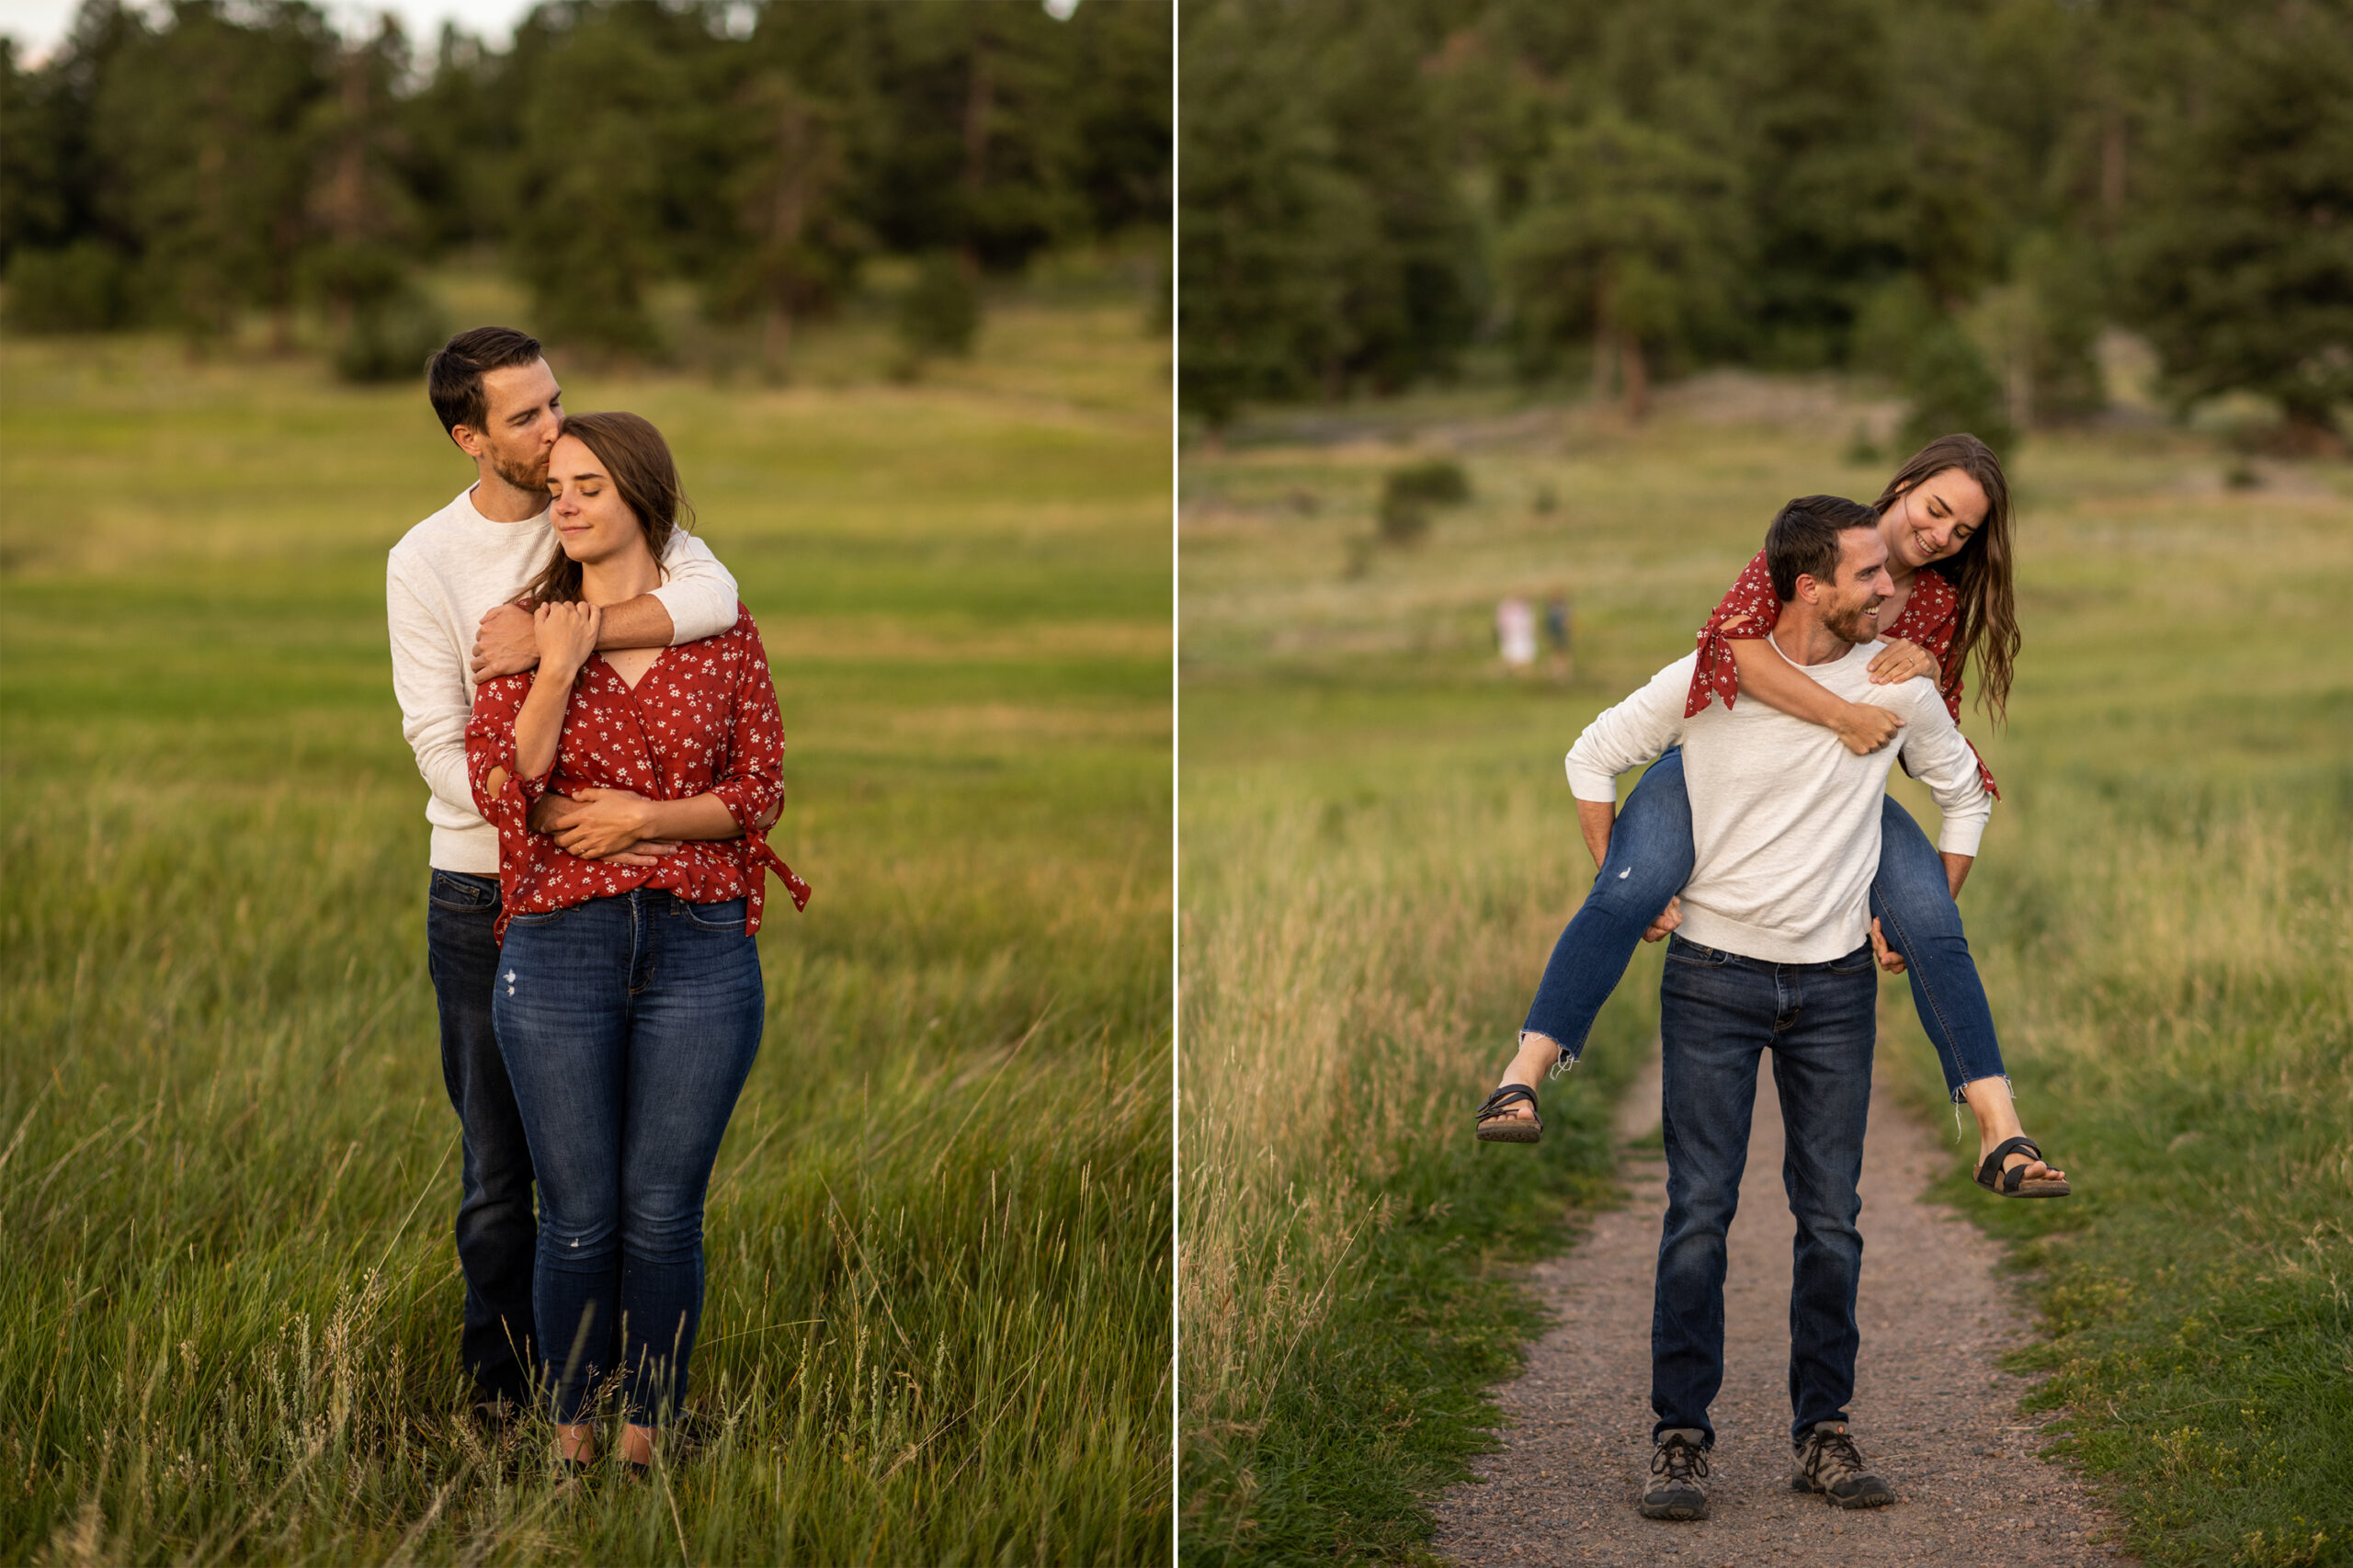 Alice and Joe pose and do piggyback during an engagement photo shoot at Three Sisters Park in Evergreen, Colorado.